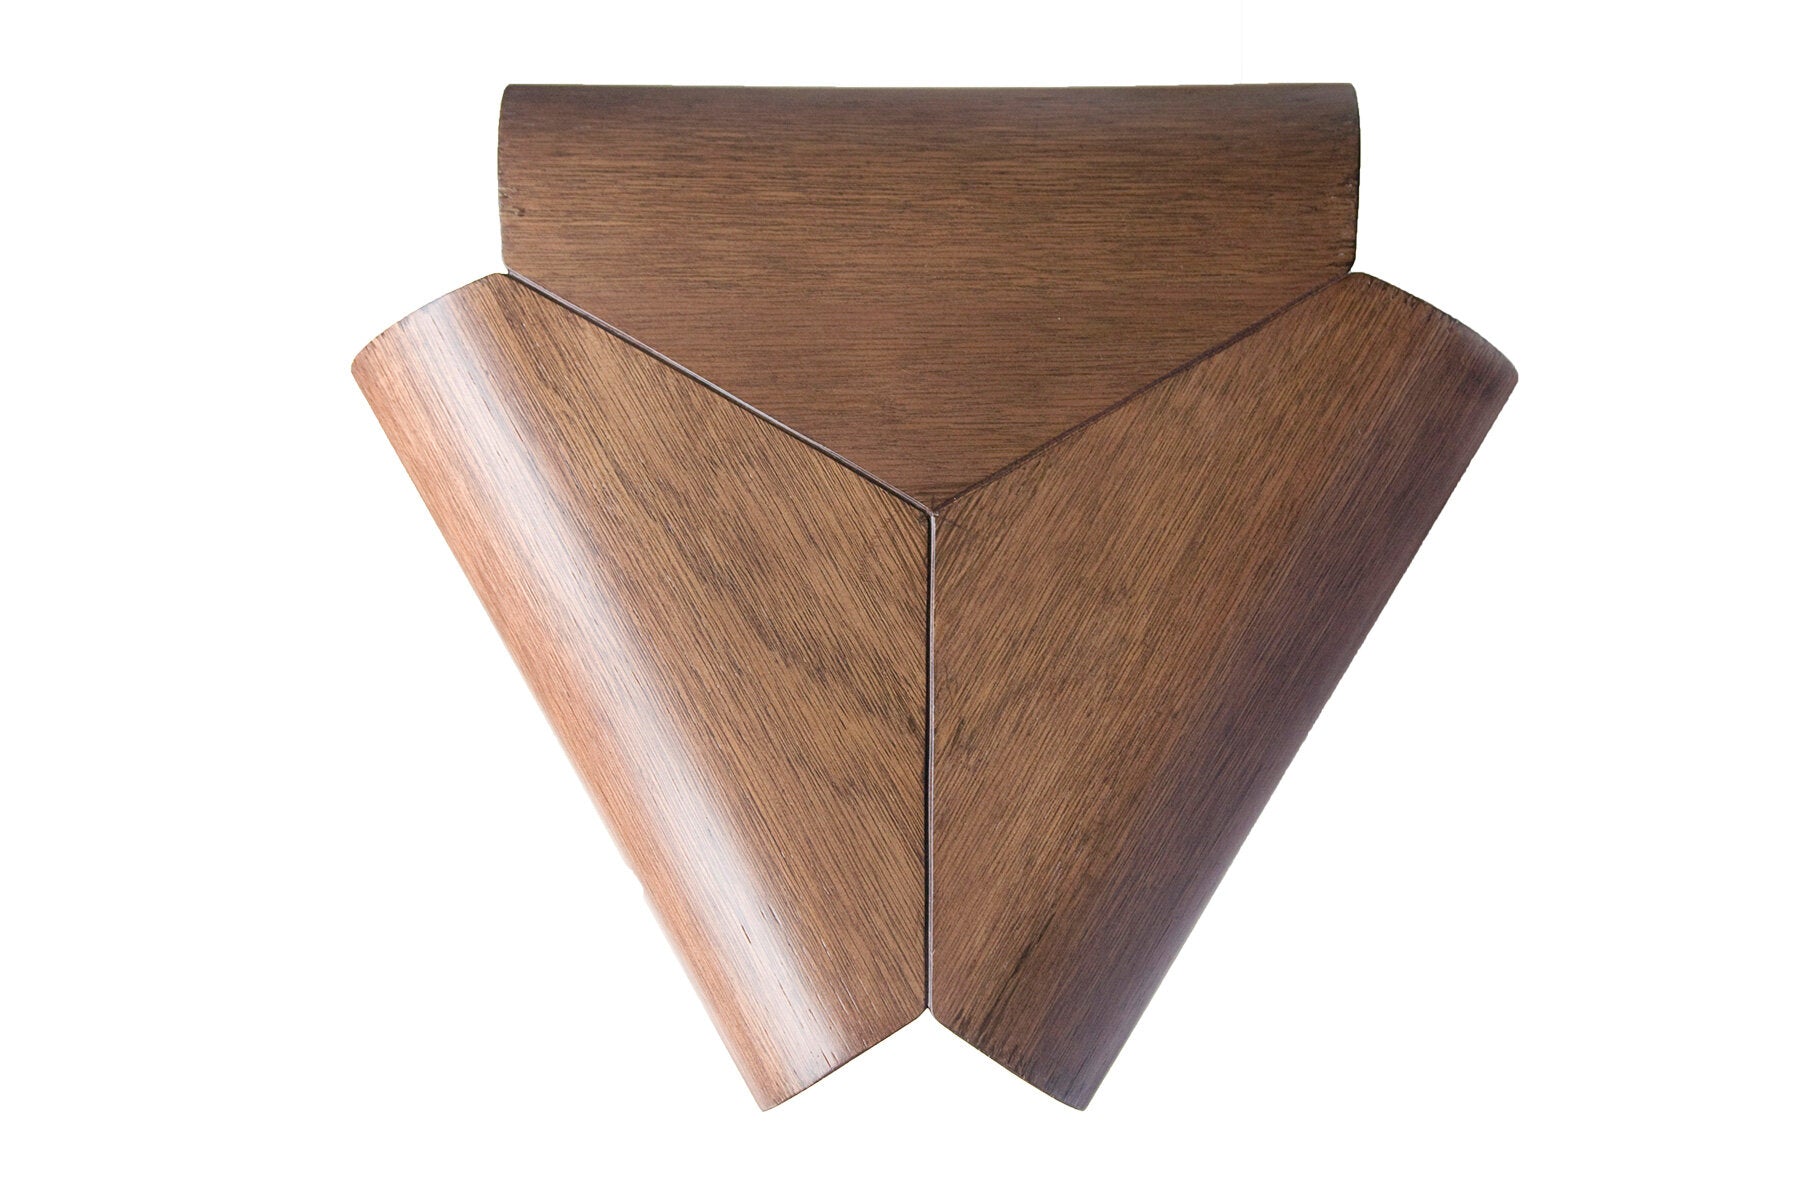 TULIP SIDE TABLE